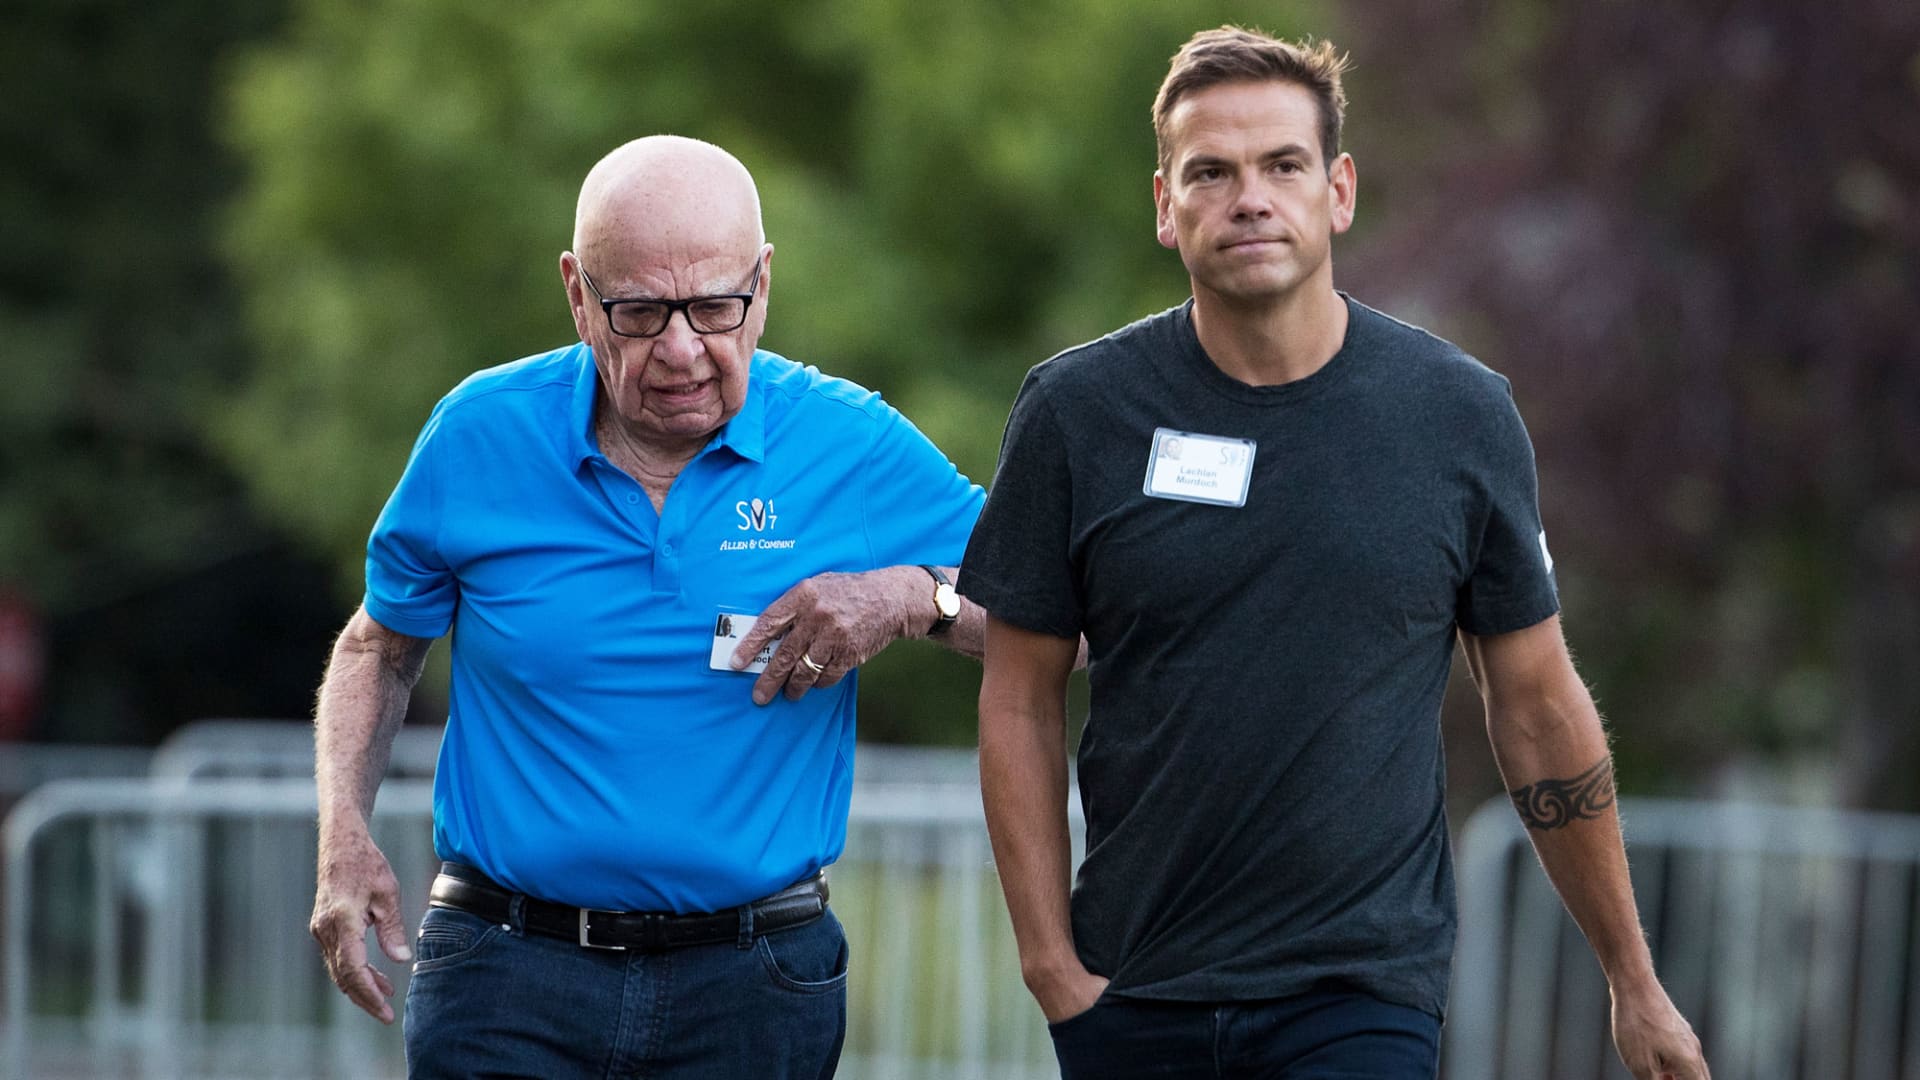 (L to R) Rupert Murdoch, executive chairman of News Corp and chairman of Fox News, and Lachlan Murdoch, co-chairman of 21st Century Fox, walk together as they arrive on the third day of the annual Allen & Company Sun Valley Conference, July 13, 2017 in Sun Valley, Idaho.